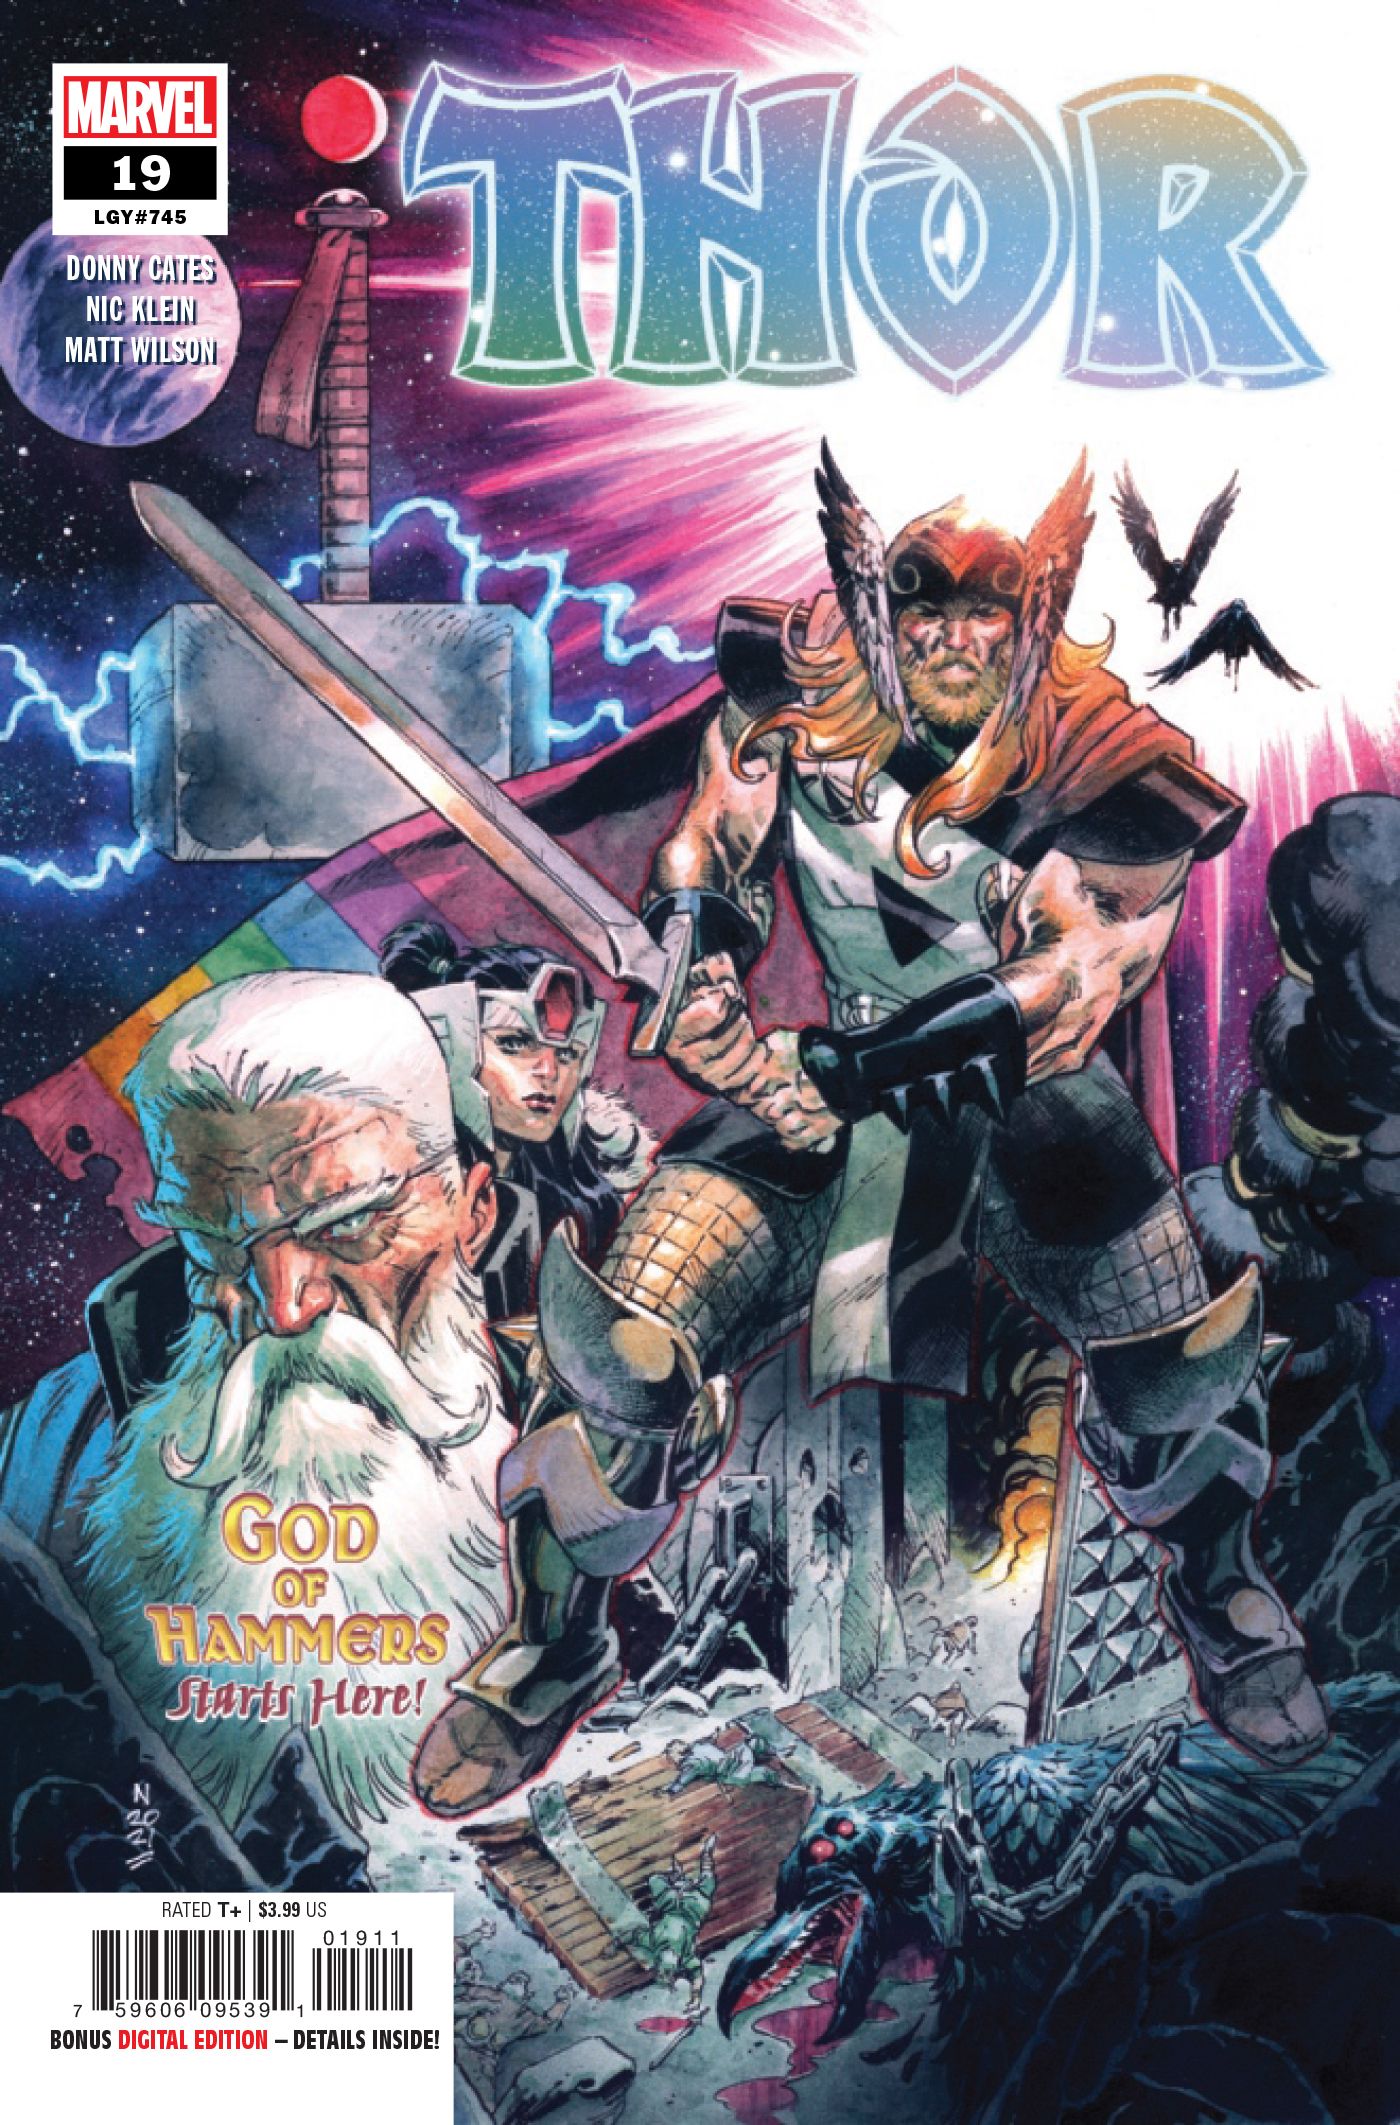 A cover for Thor #19 features Thor carrying a sword unlike his usual hammer.